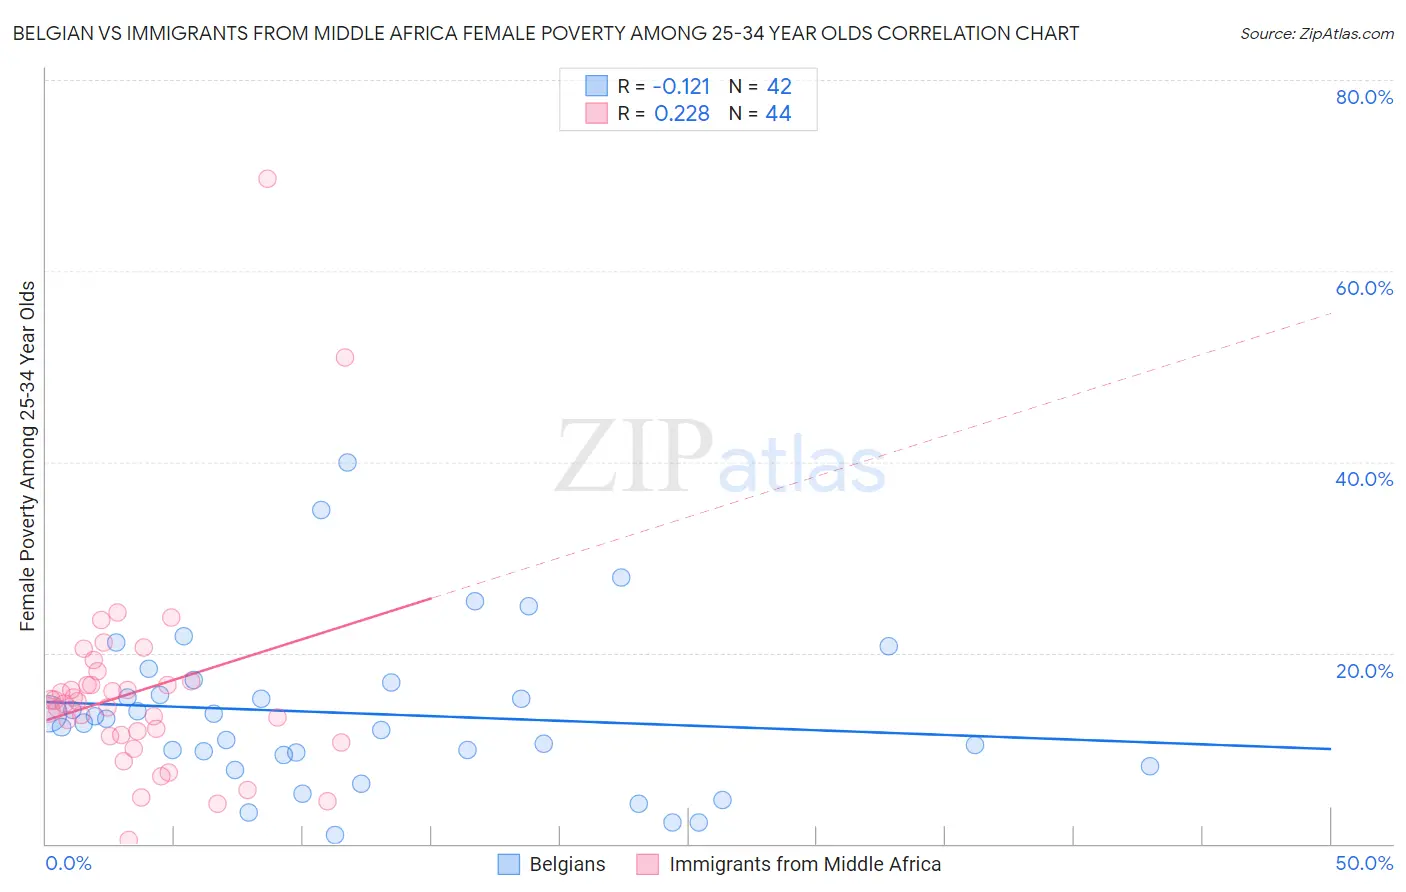 Belgian vs Immigrants from Middle Africa Female Poverty Among 25-34 Year Olds